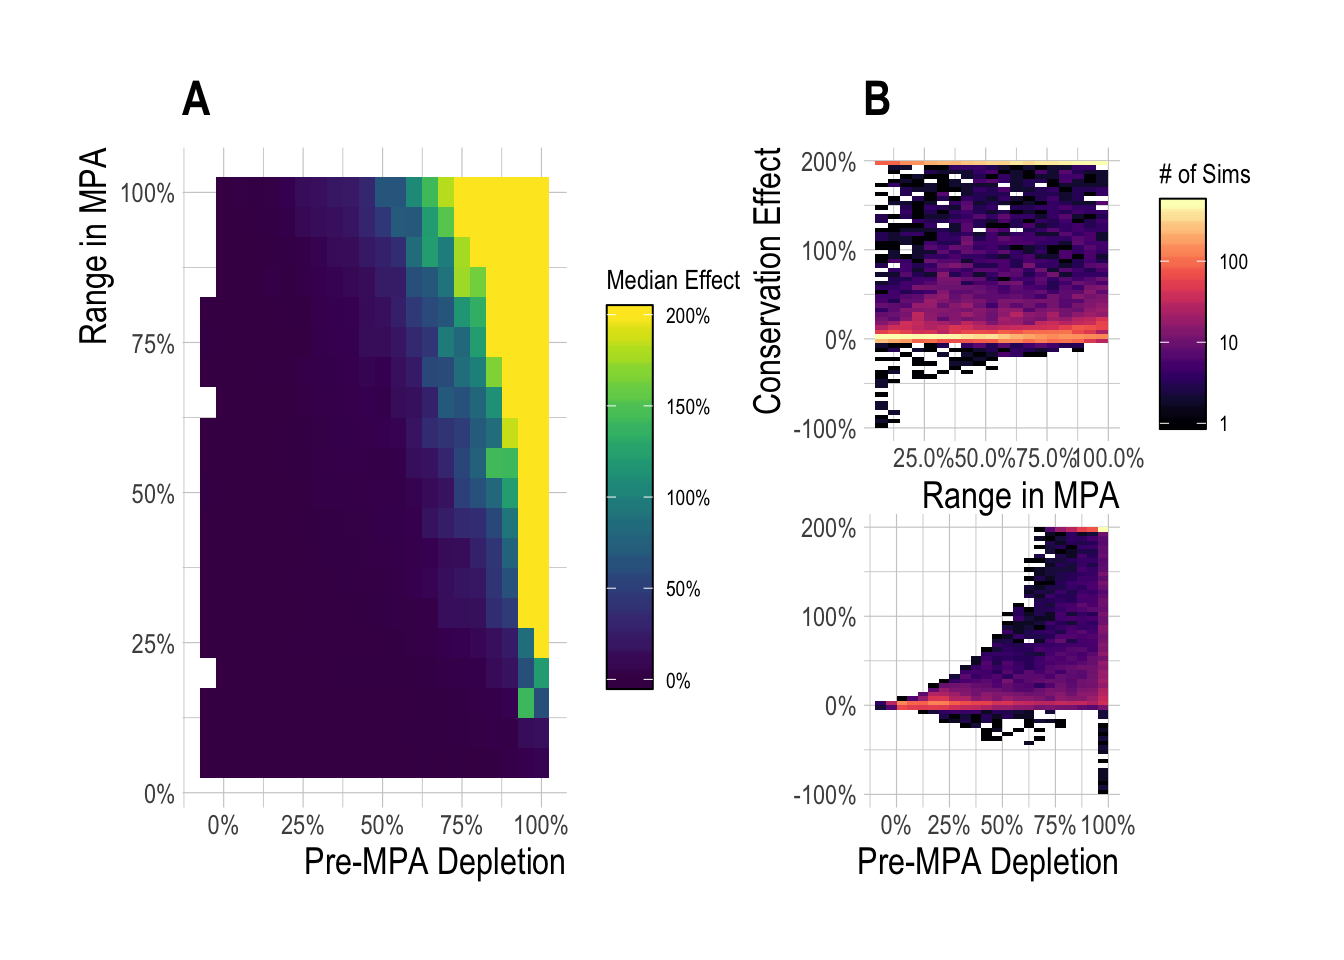 Median (A) and range of (B) regional MPA effect after 15 years of protection across a range of pre-MPA depletions and MPA sizes